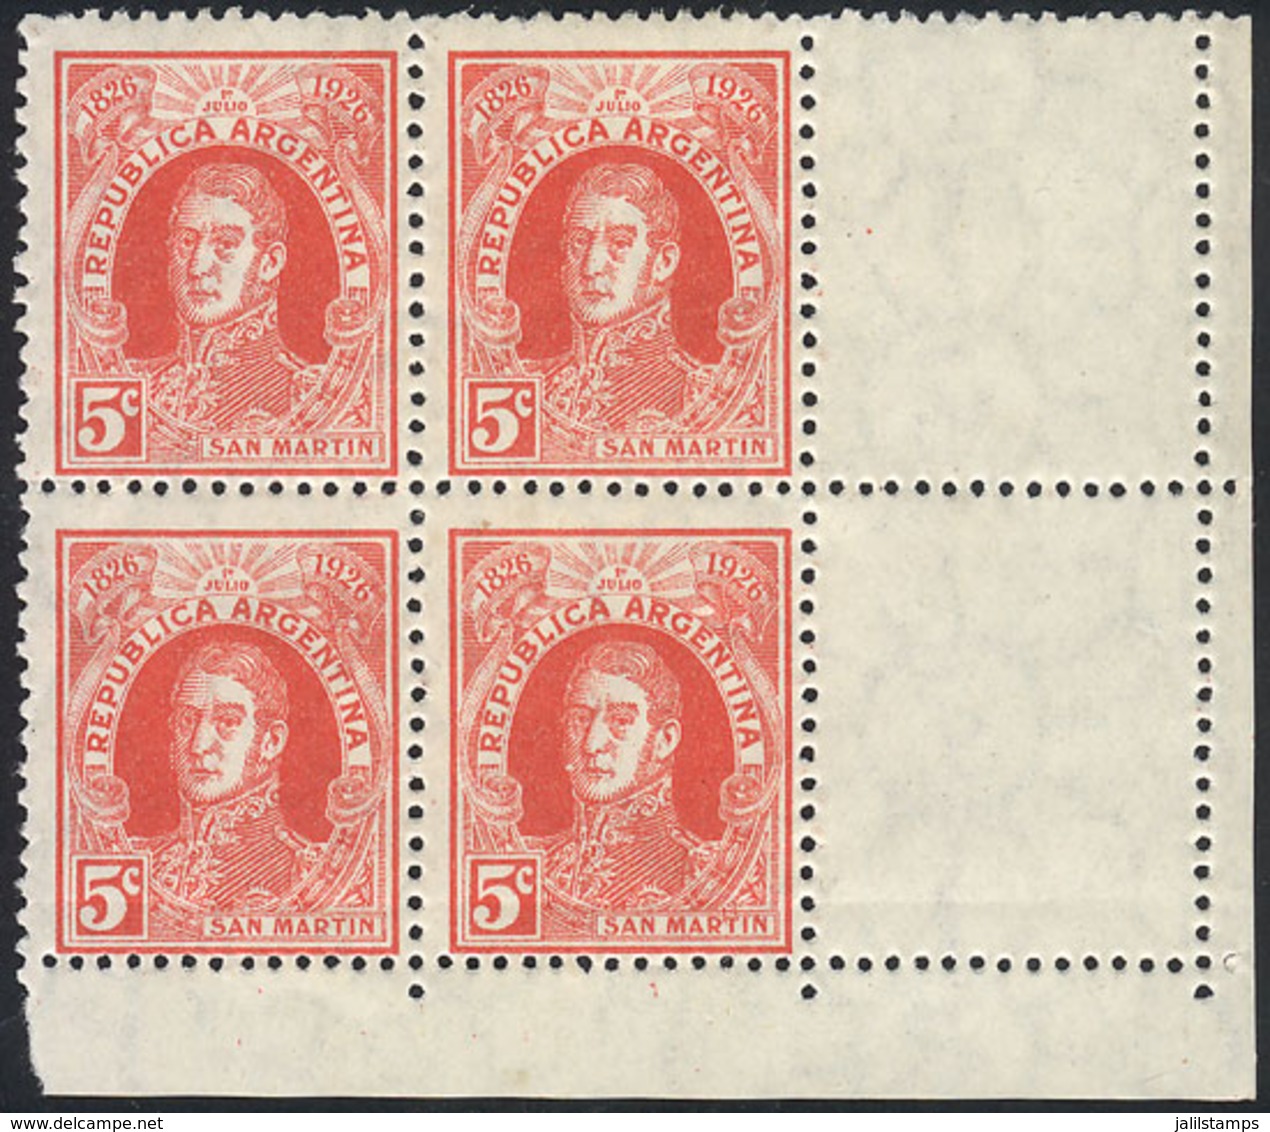 ARGENTINA: GJ.622CD, 1926 5c. San Martín, Block Of 4 With LABELS AT RIGHT, Very Nice! - Covers & Documents